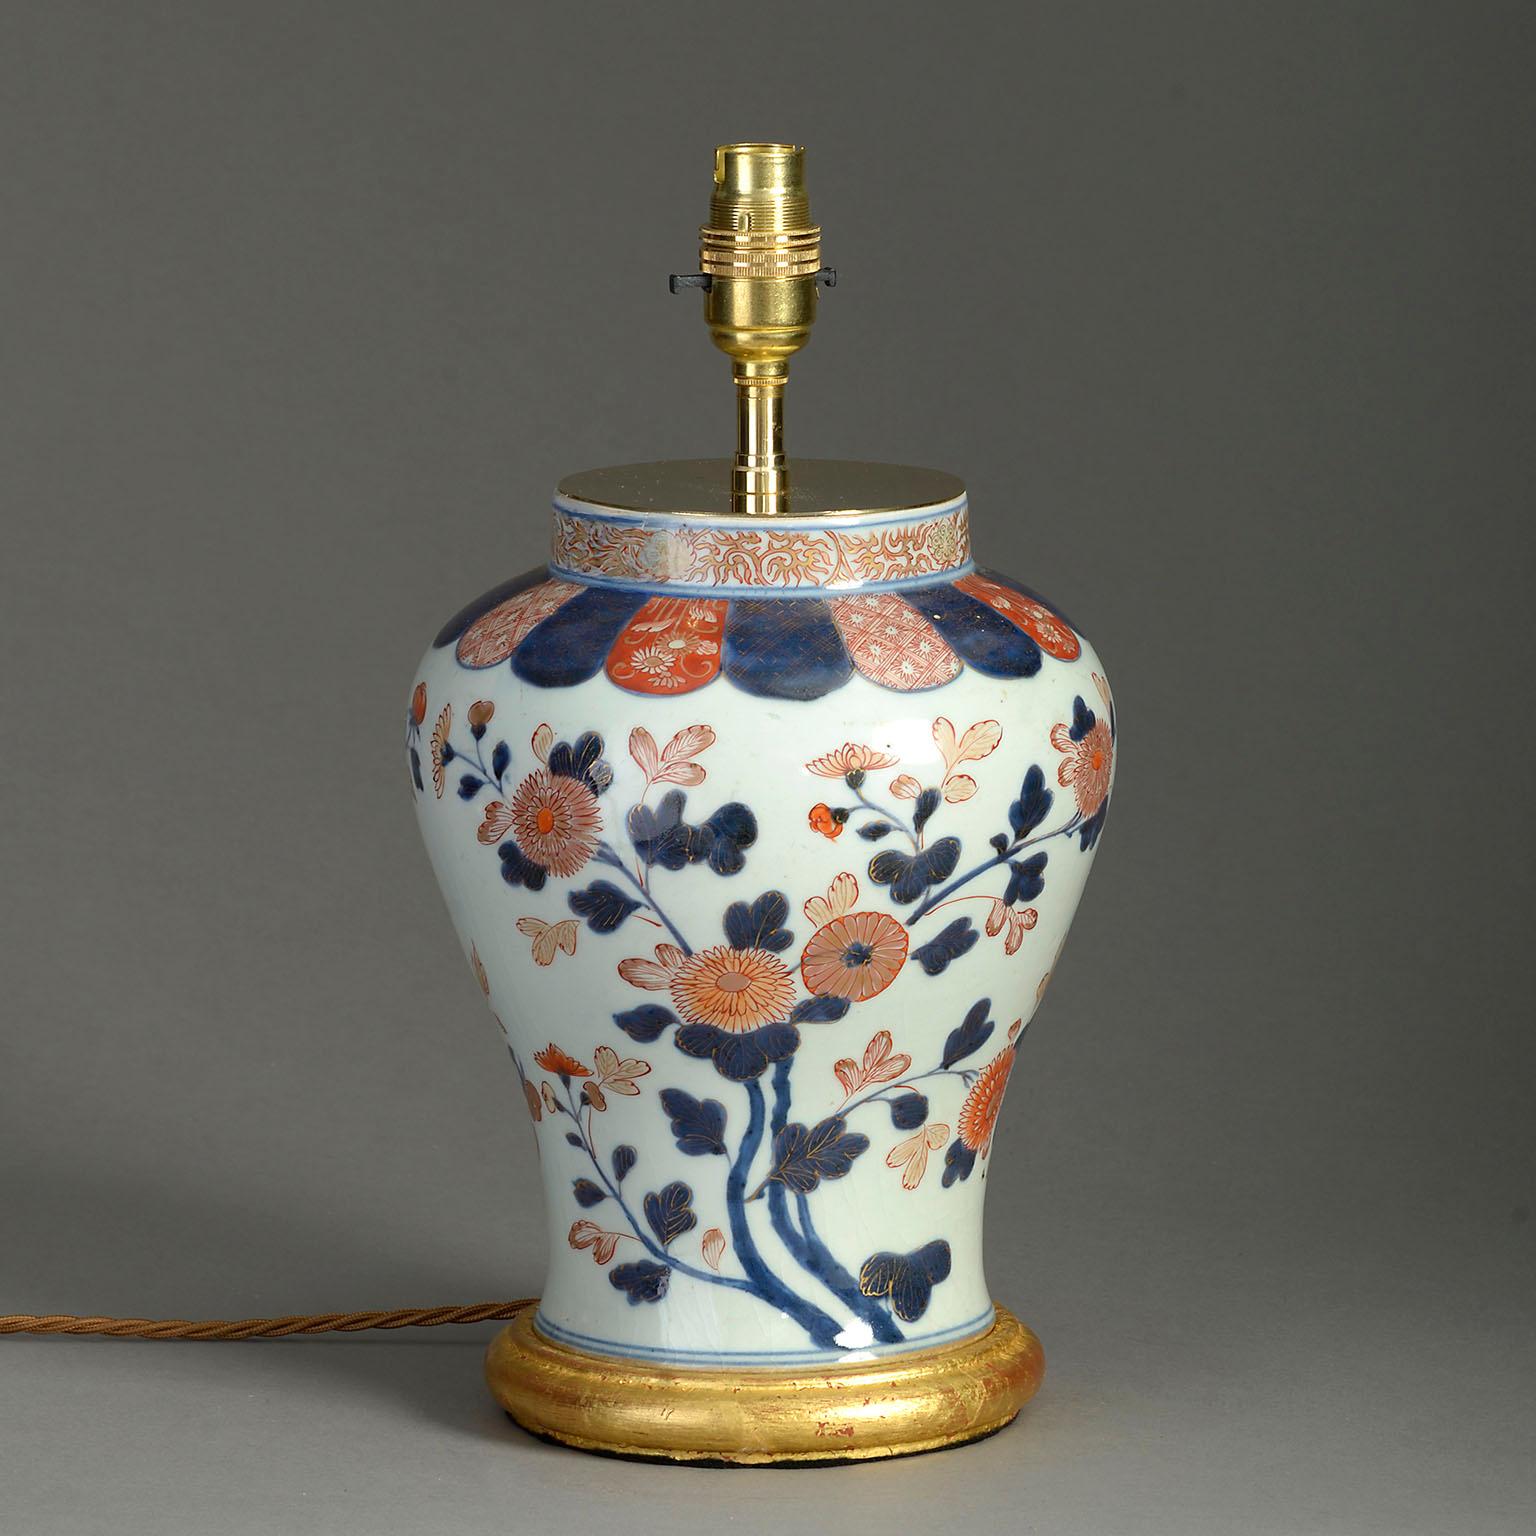 An early 18th century Imari Porcelain baluster vase of generous form, decorated with polychrome blossoms on a white ground. Now mounted as a lamp and set upon a hand-turned giltwood base.

Dimensions refer to vase and base only.

Shade not